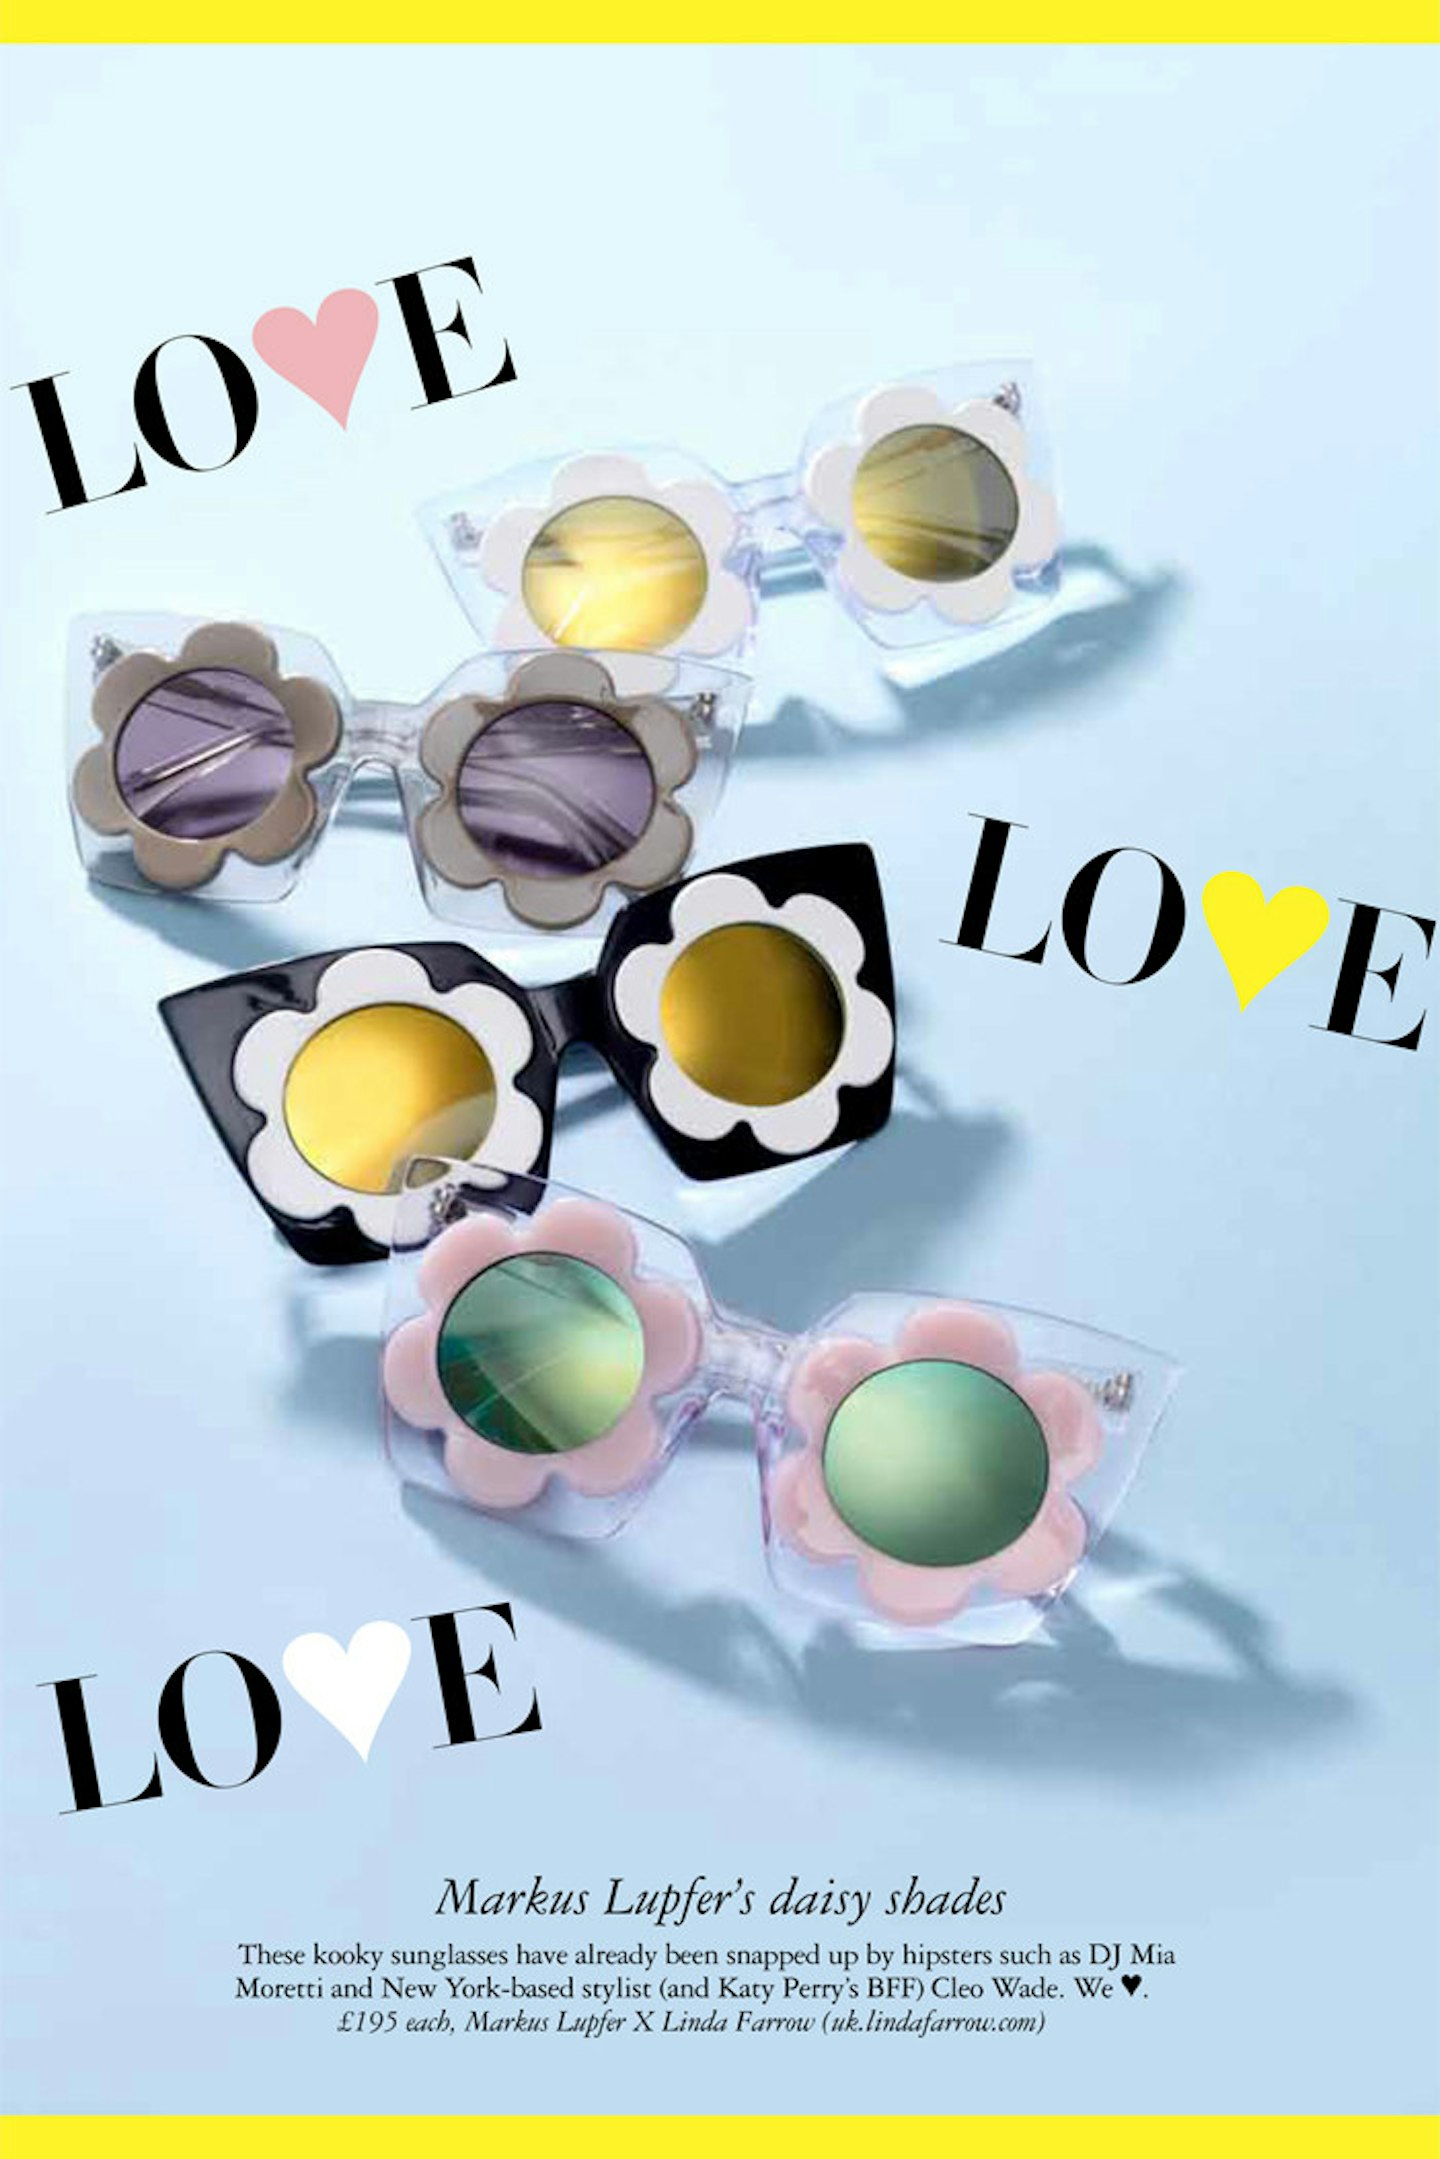 Grazia is Love Love Loving these frames this week...